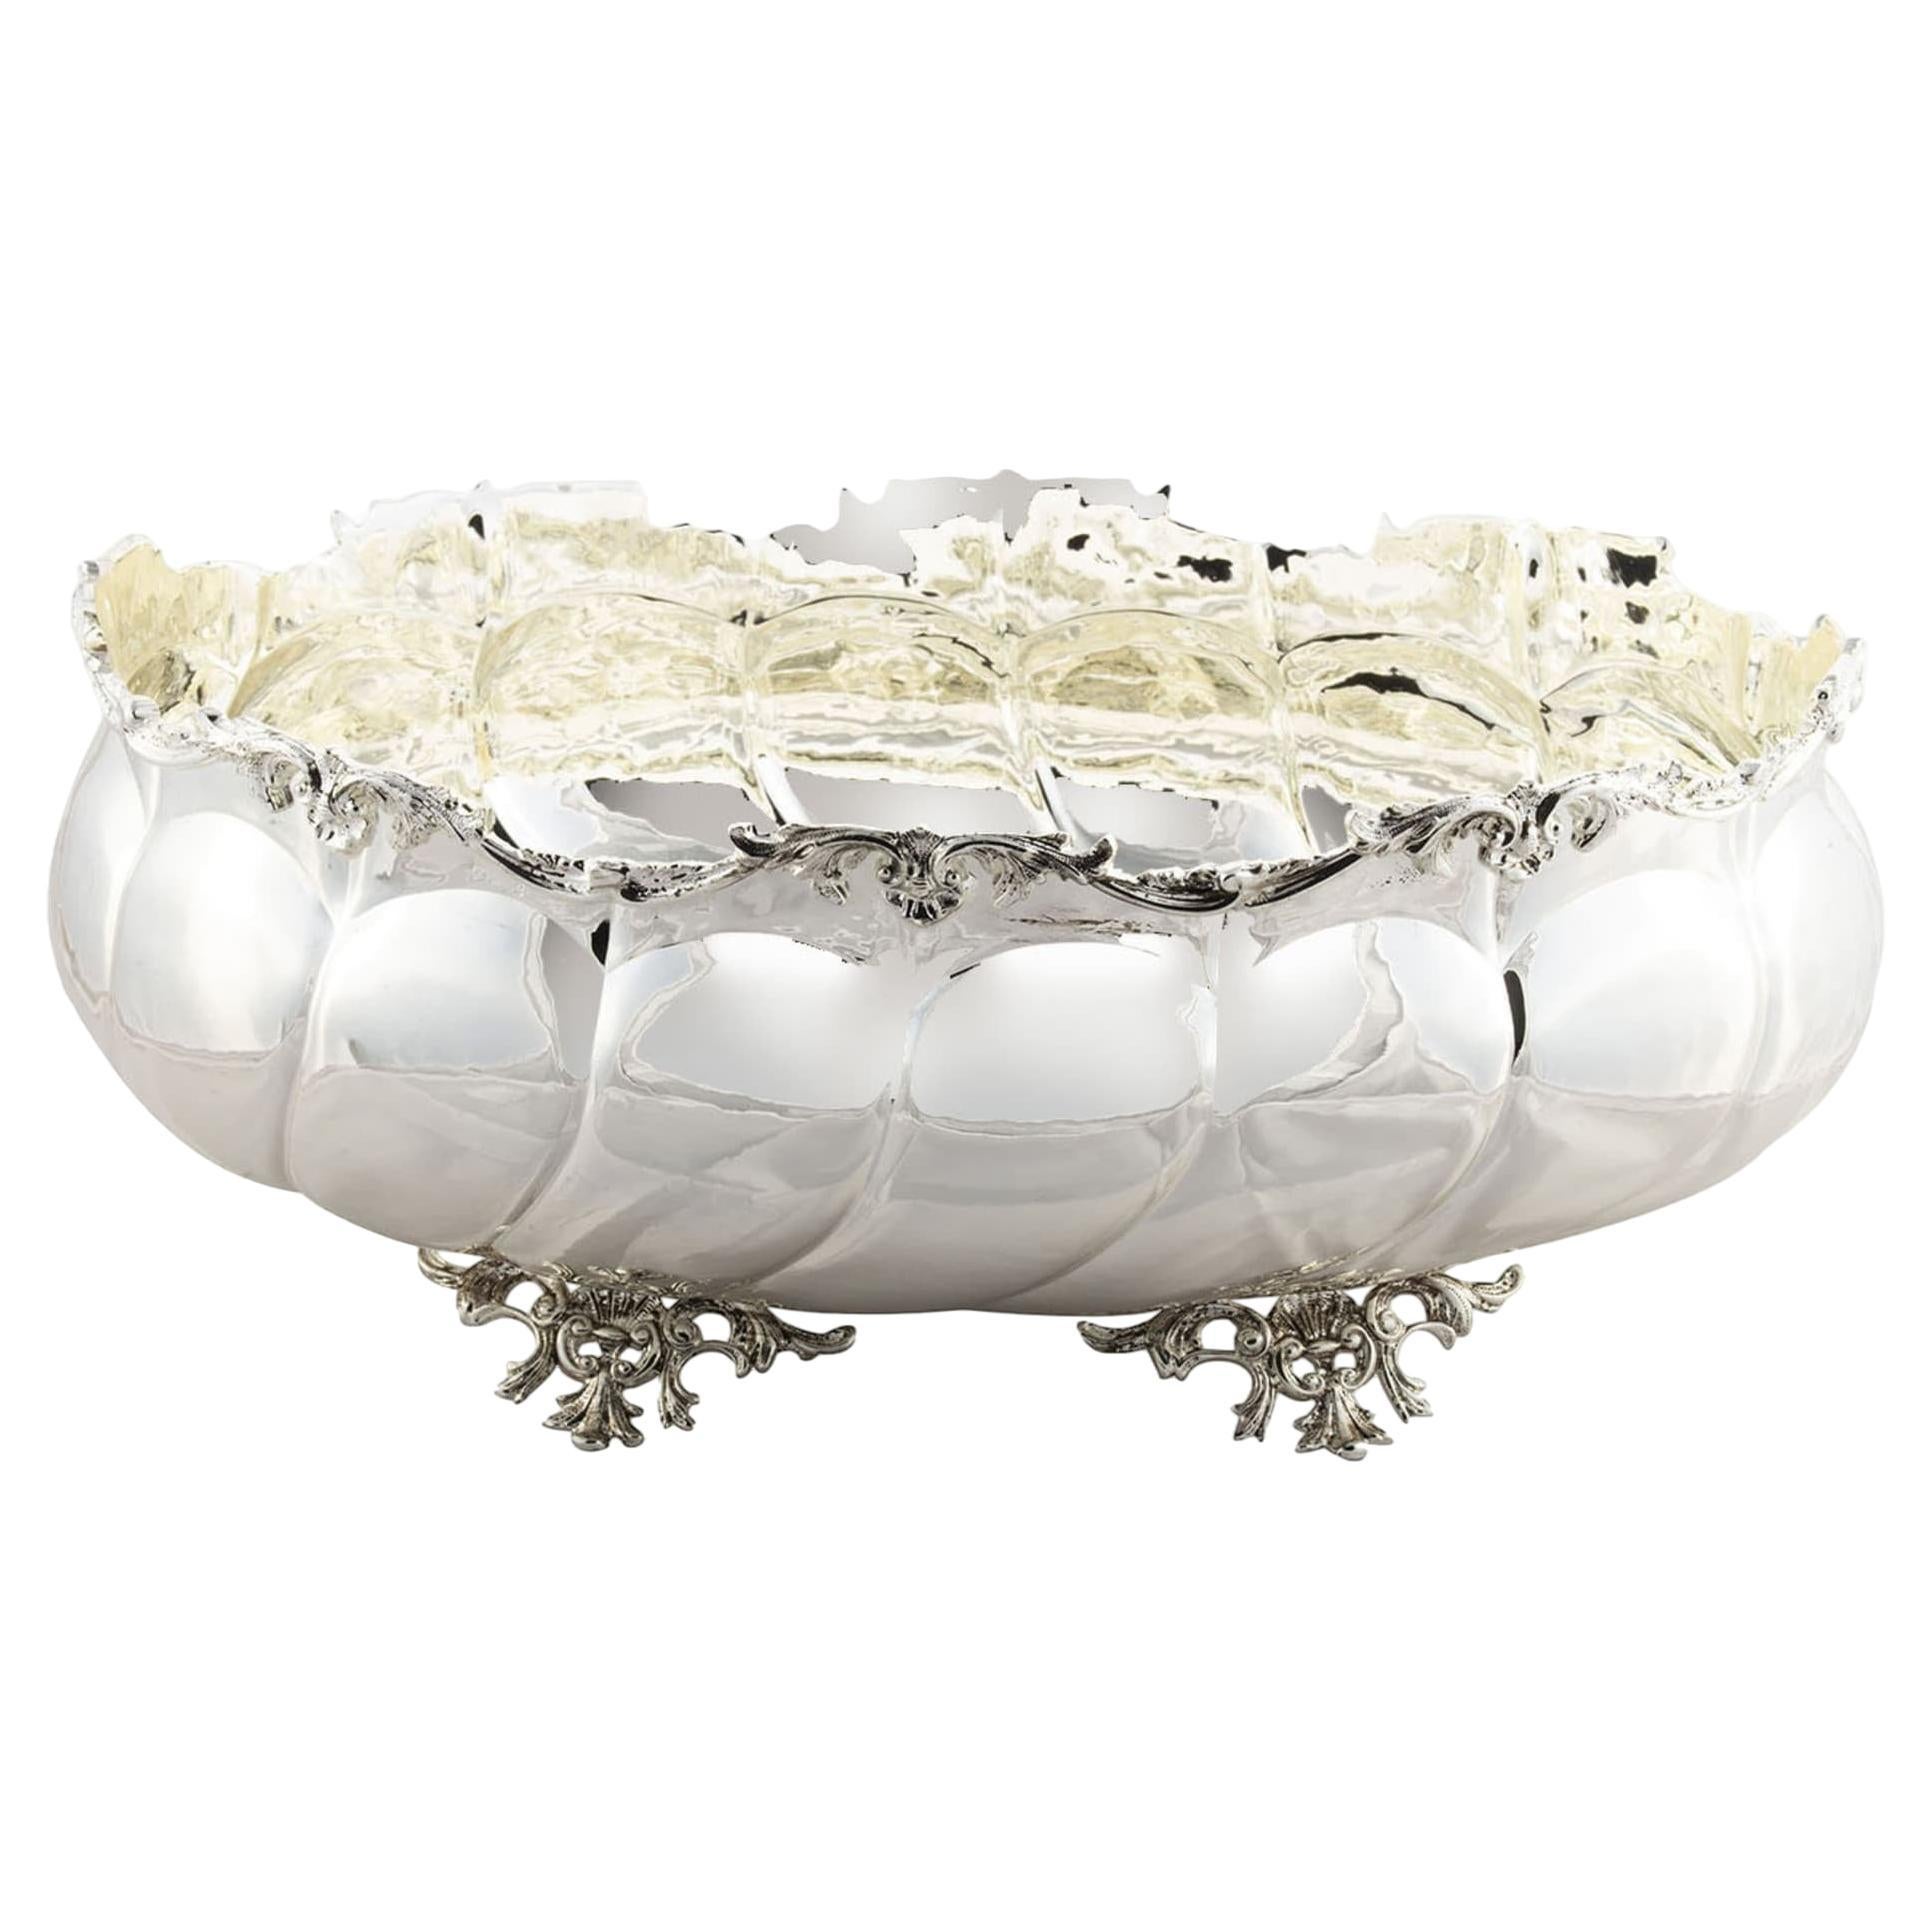 Classic-Style Oval Footed Silver Centerpiece Bowl